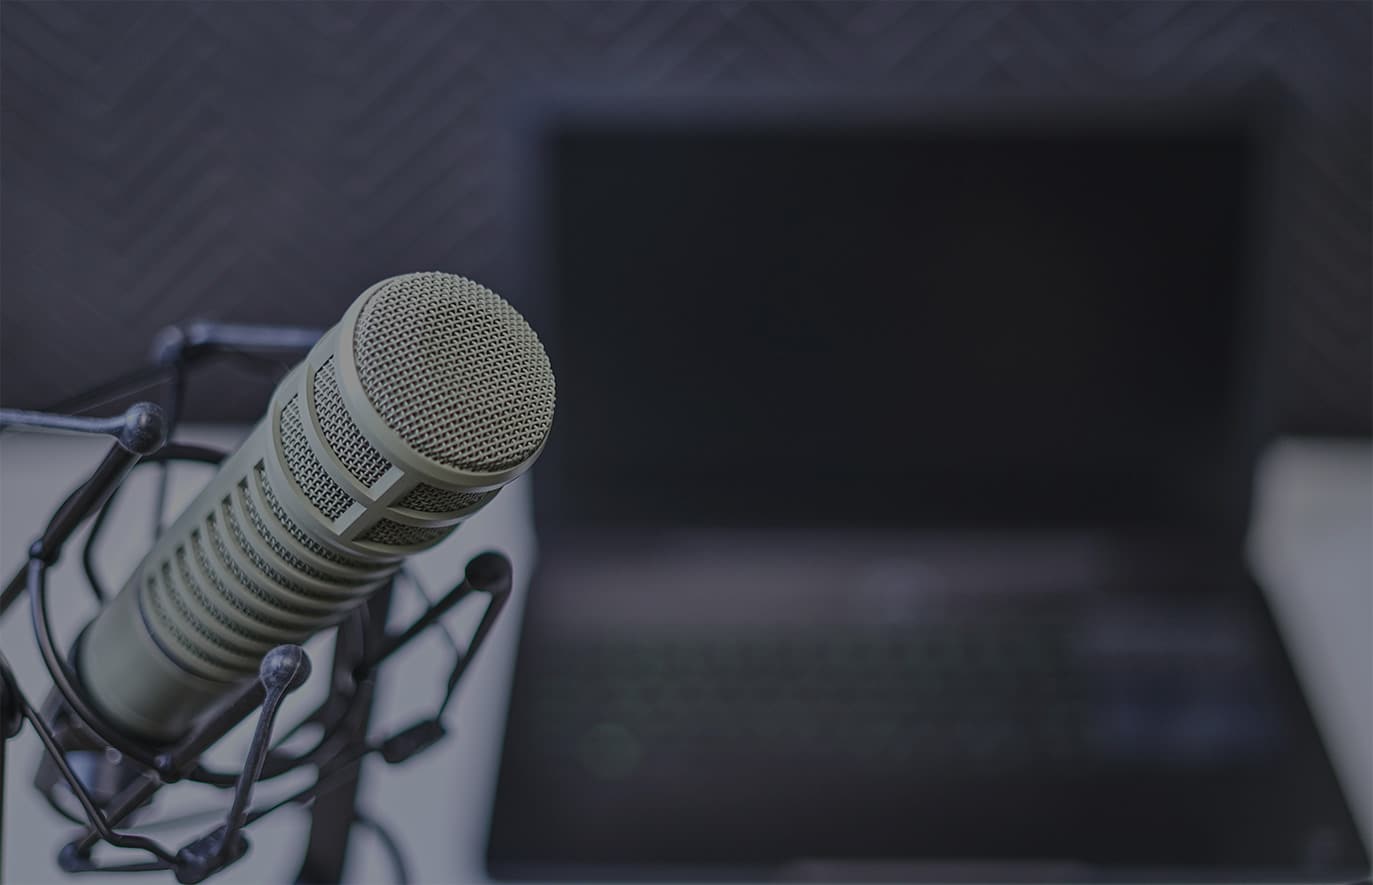 FCPA Compliance & Ethics Podcast featuring Jerry Coyne — The Use of Monitors by State Attorneys General: Ep. 4